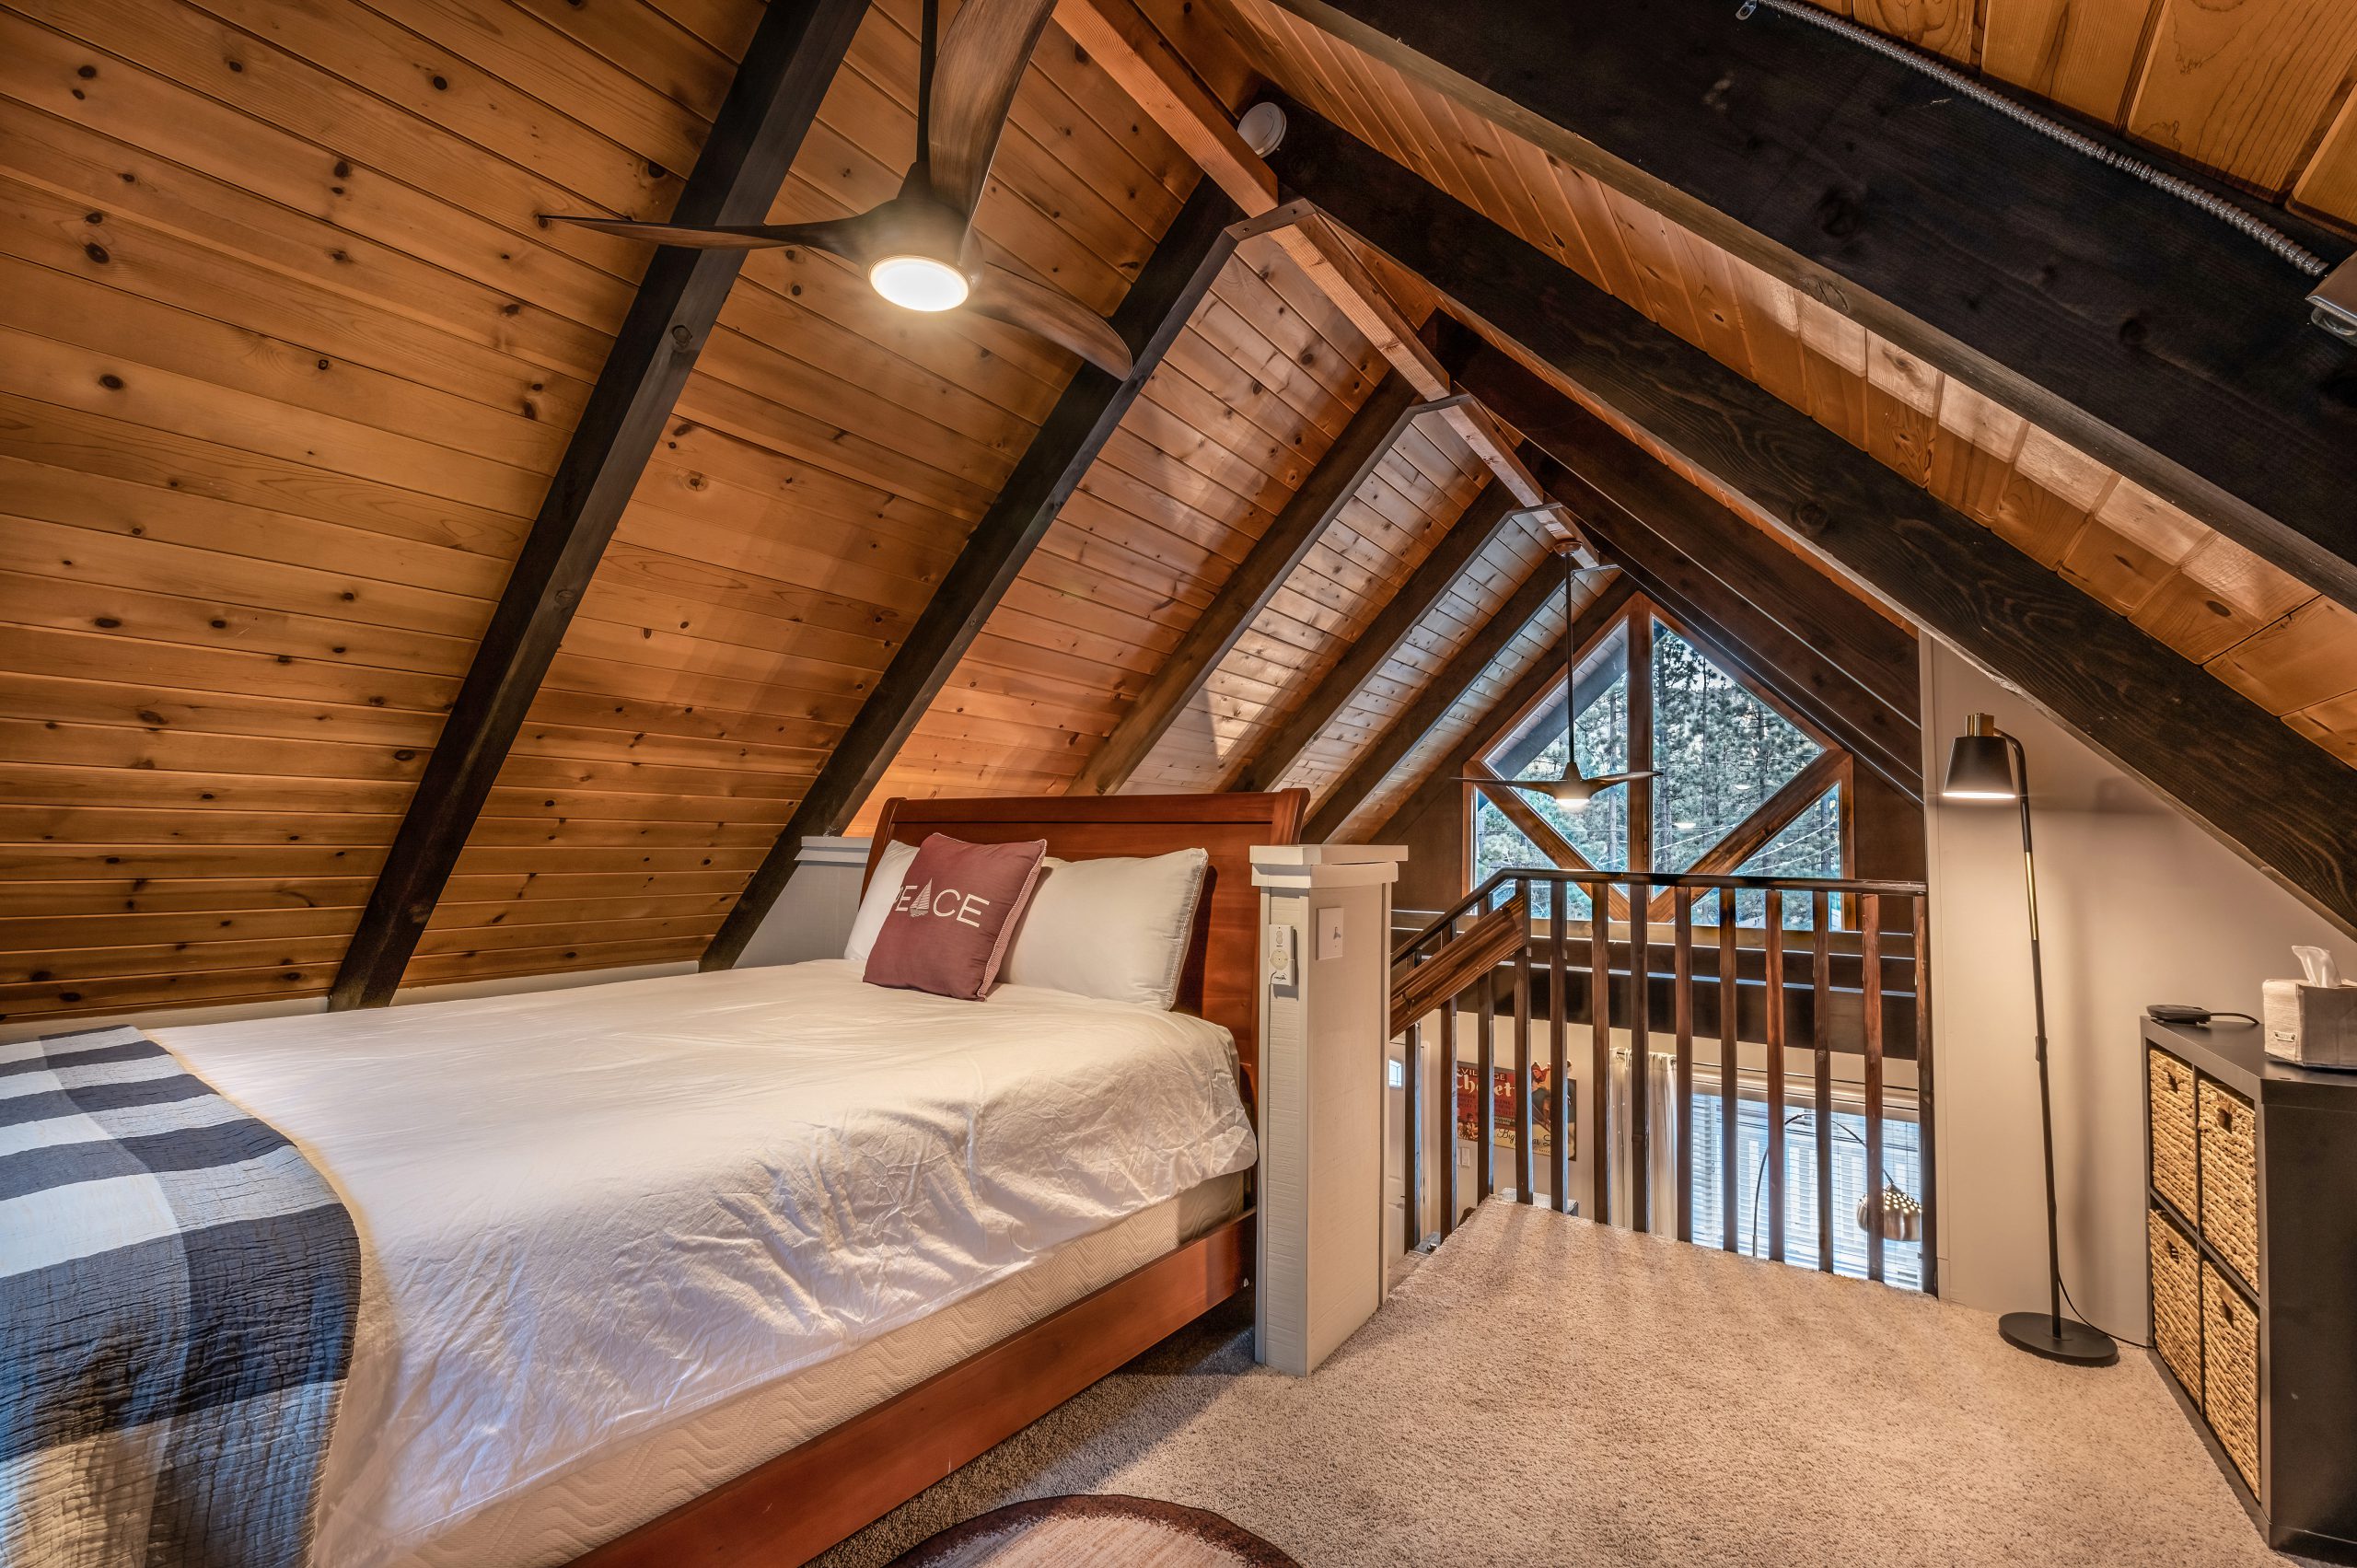 A different angle from the small, but cozy loft. Queen size bed and ceiling fan with gorgeous view out the window compliment this special area.